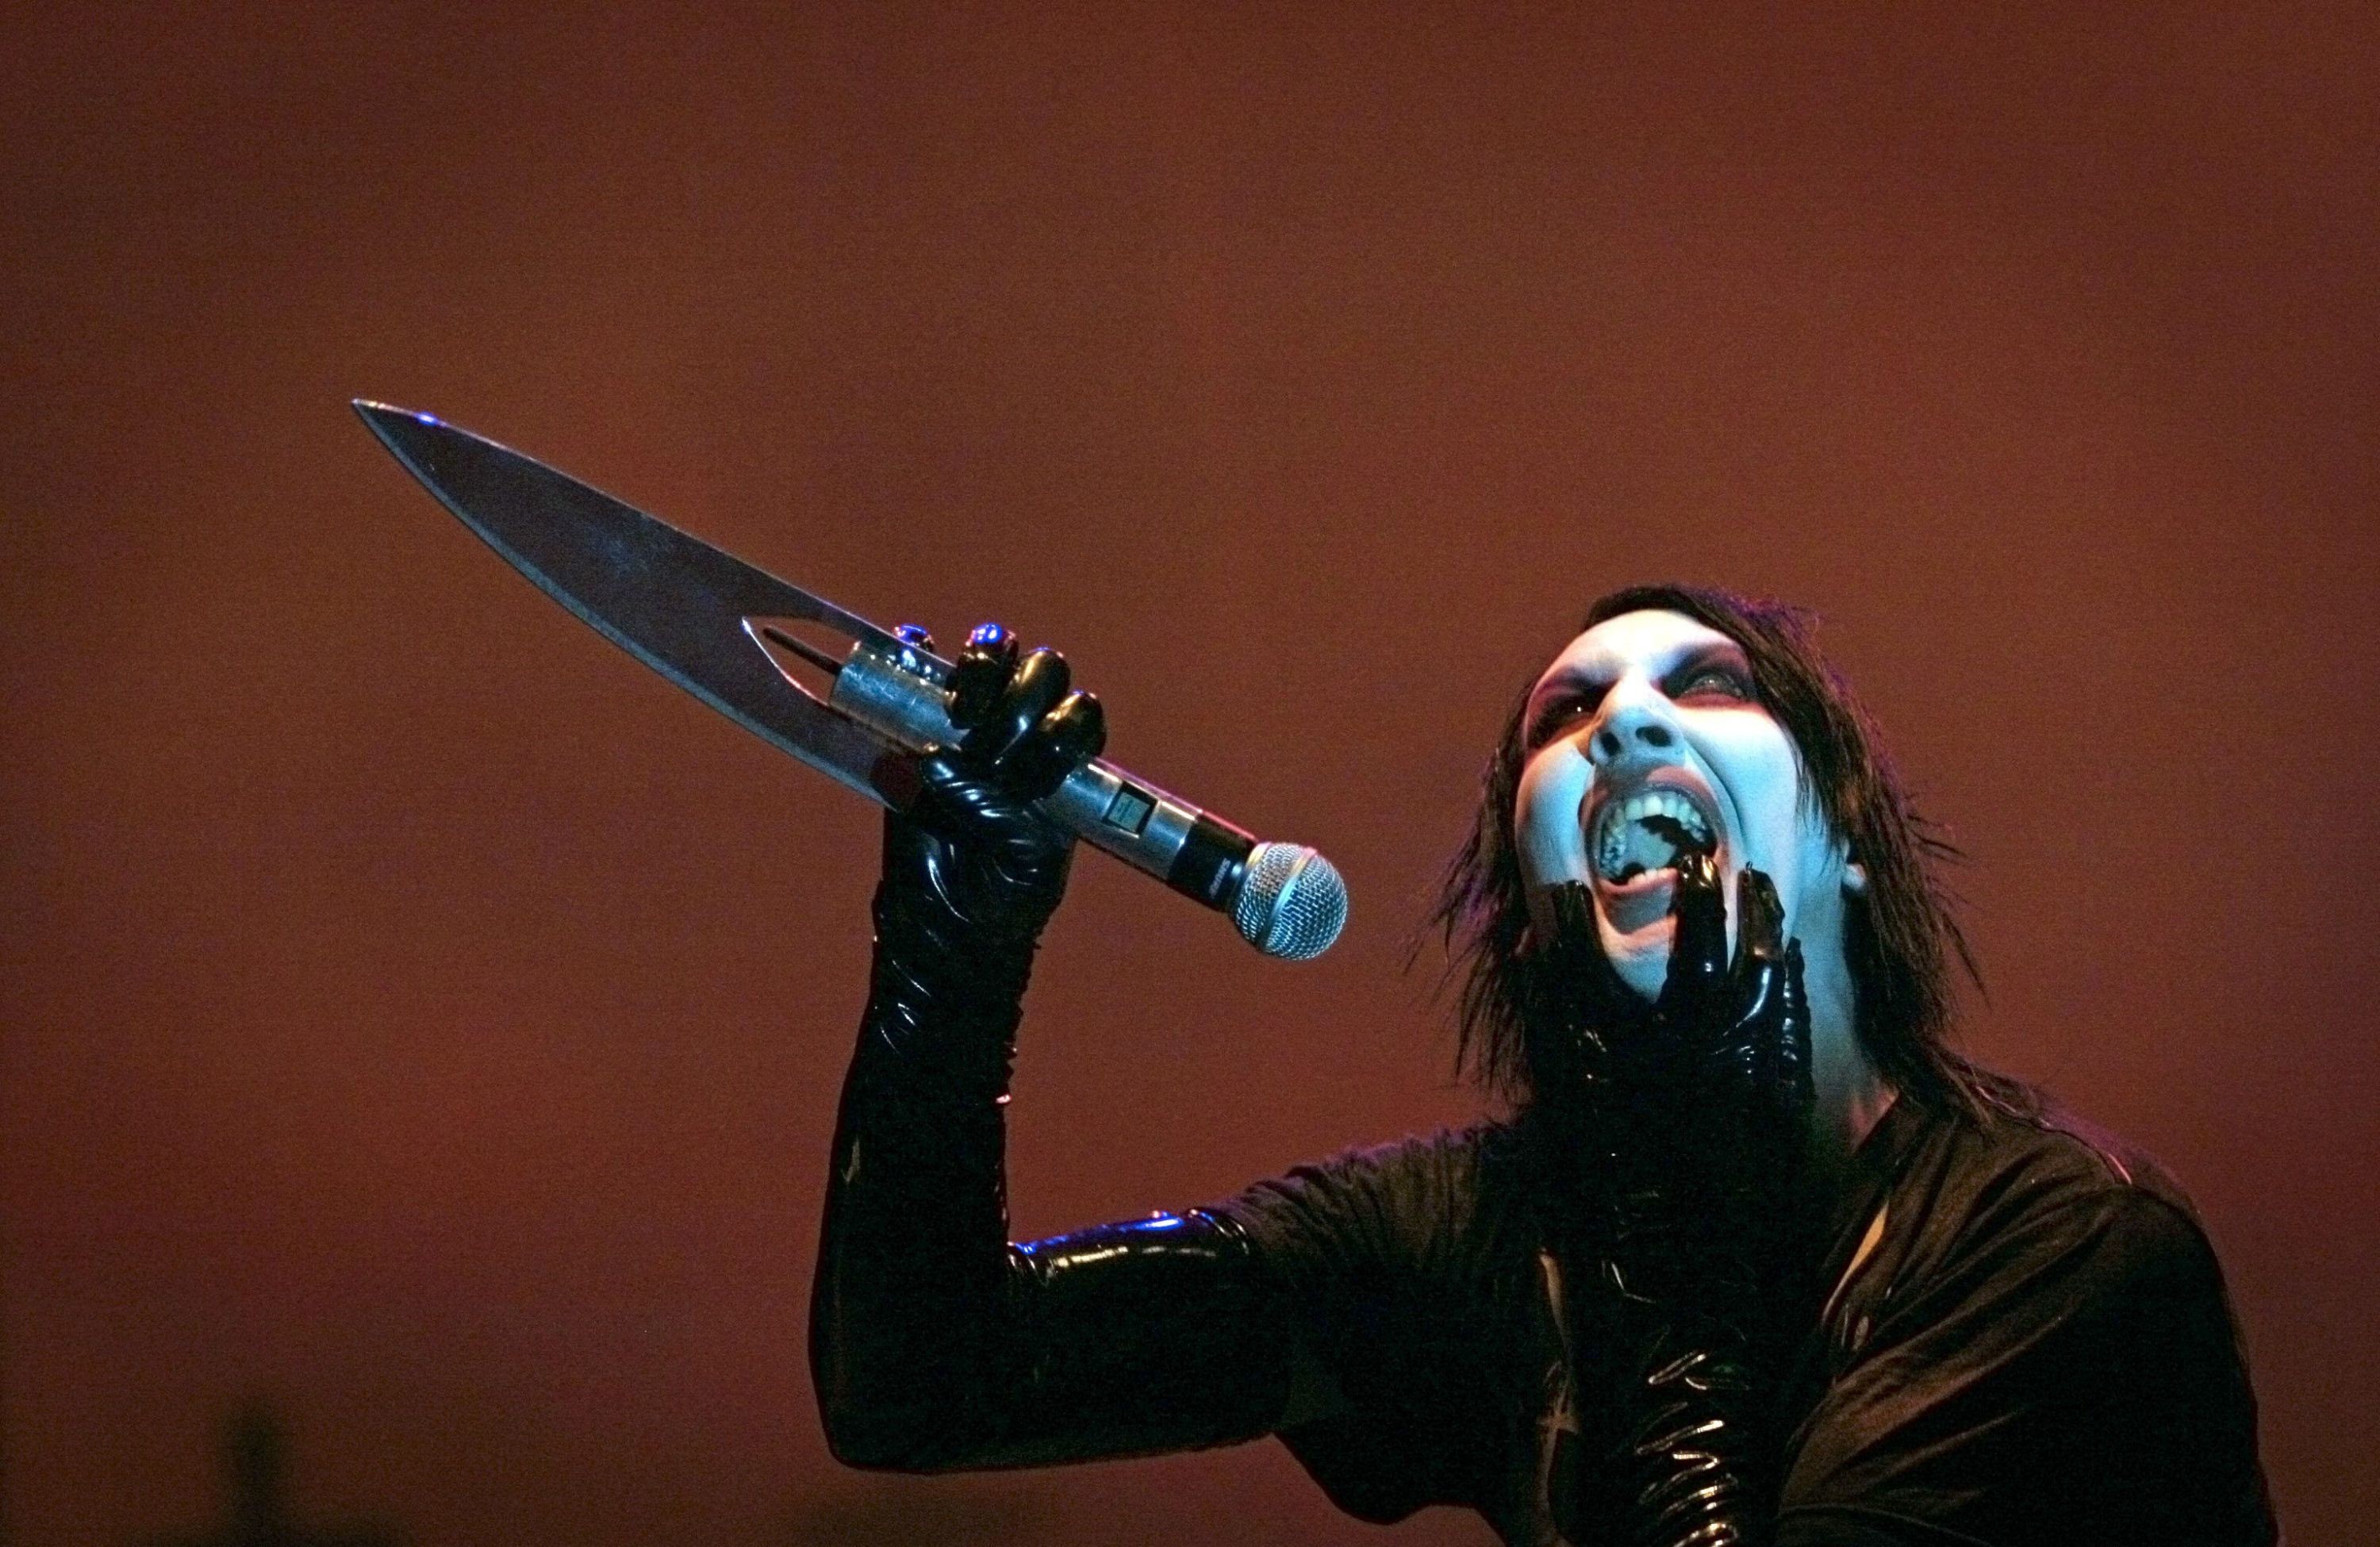 Marilyn manson wallpaper pictures free by Walton Sinclair 2016 08 15